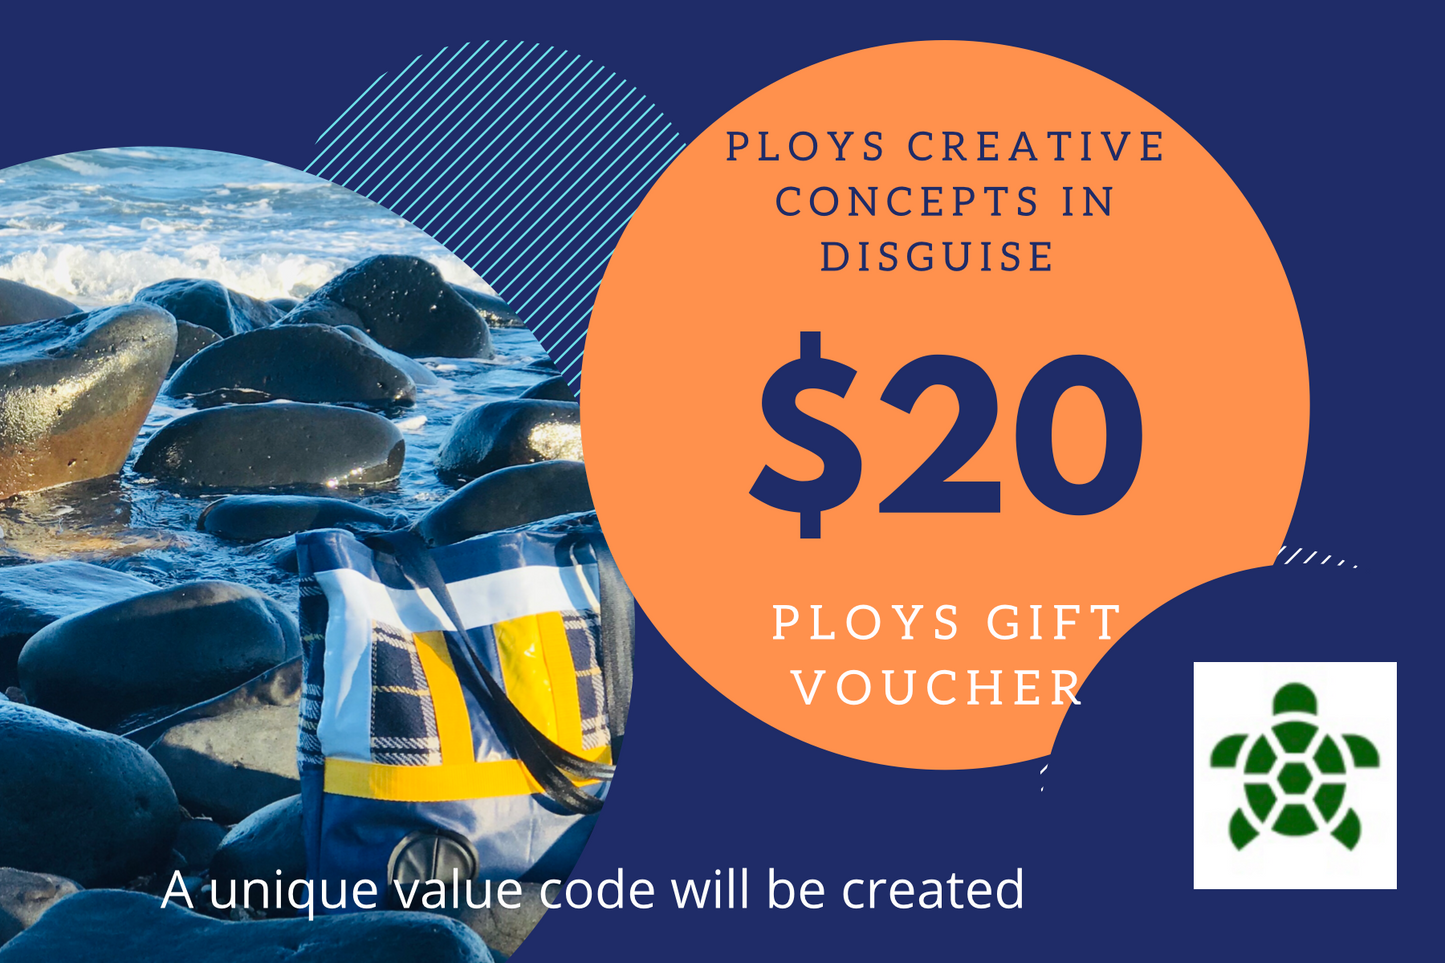 PLOYS bags from recycled pool inflatables gift vouchers $20